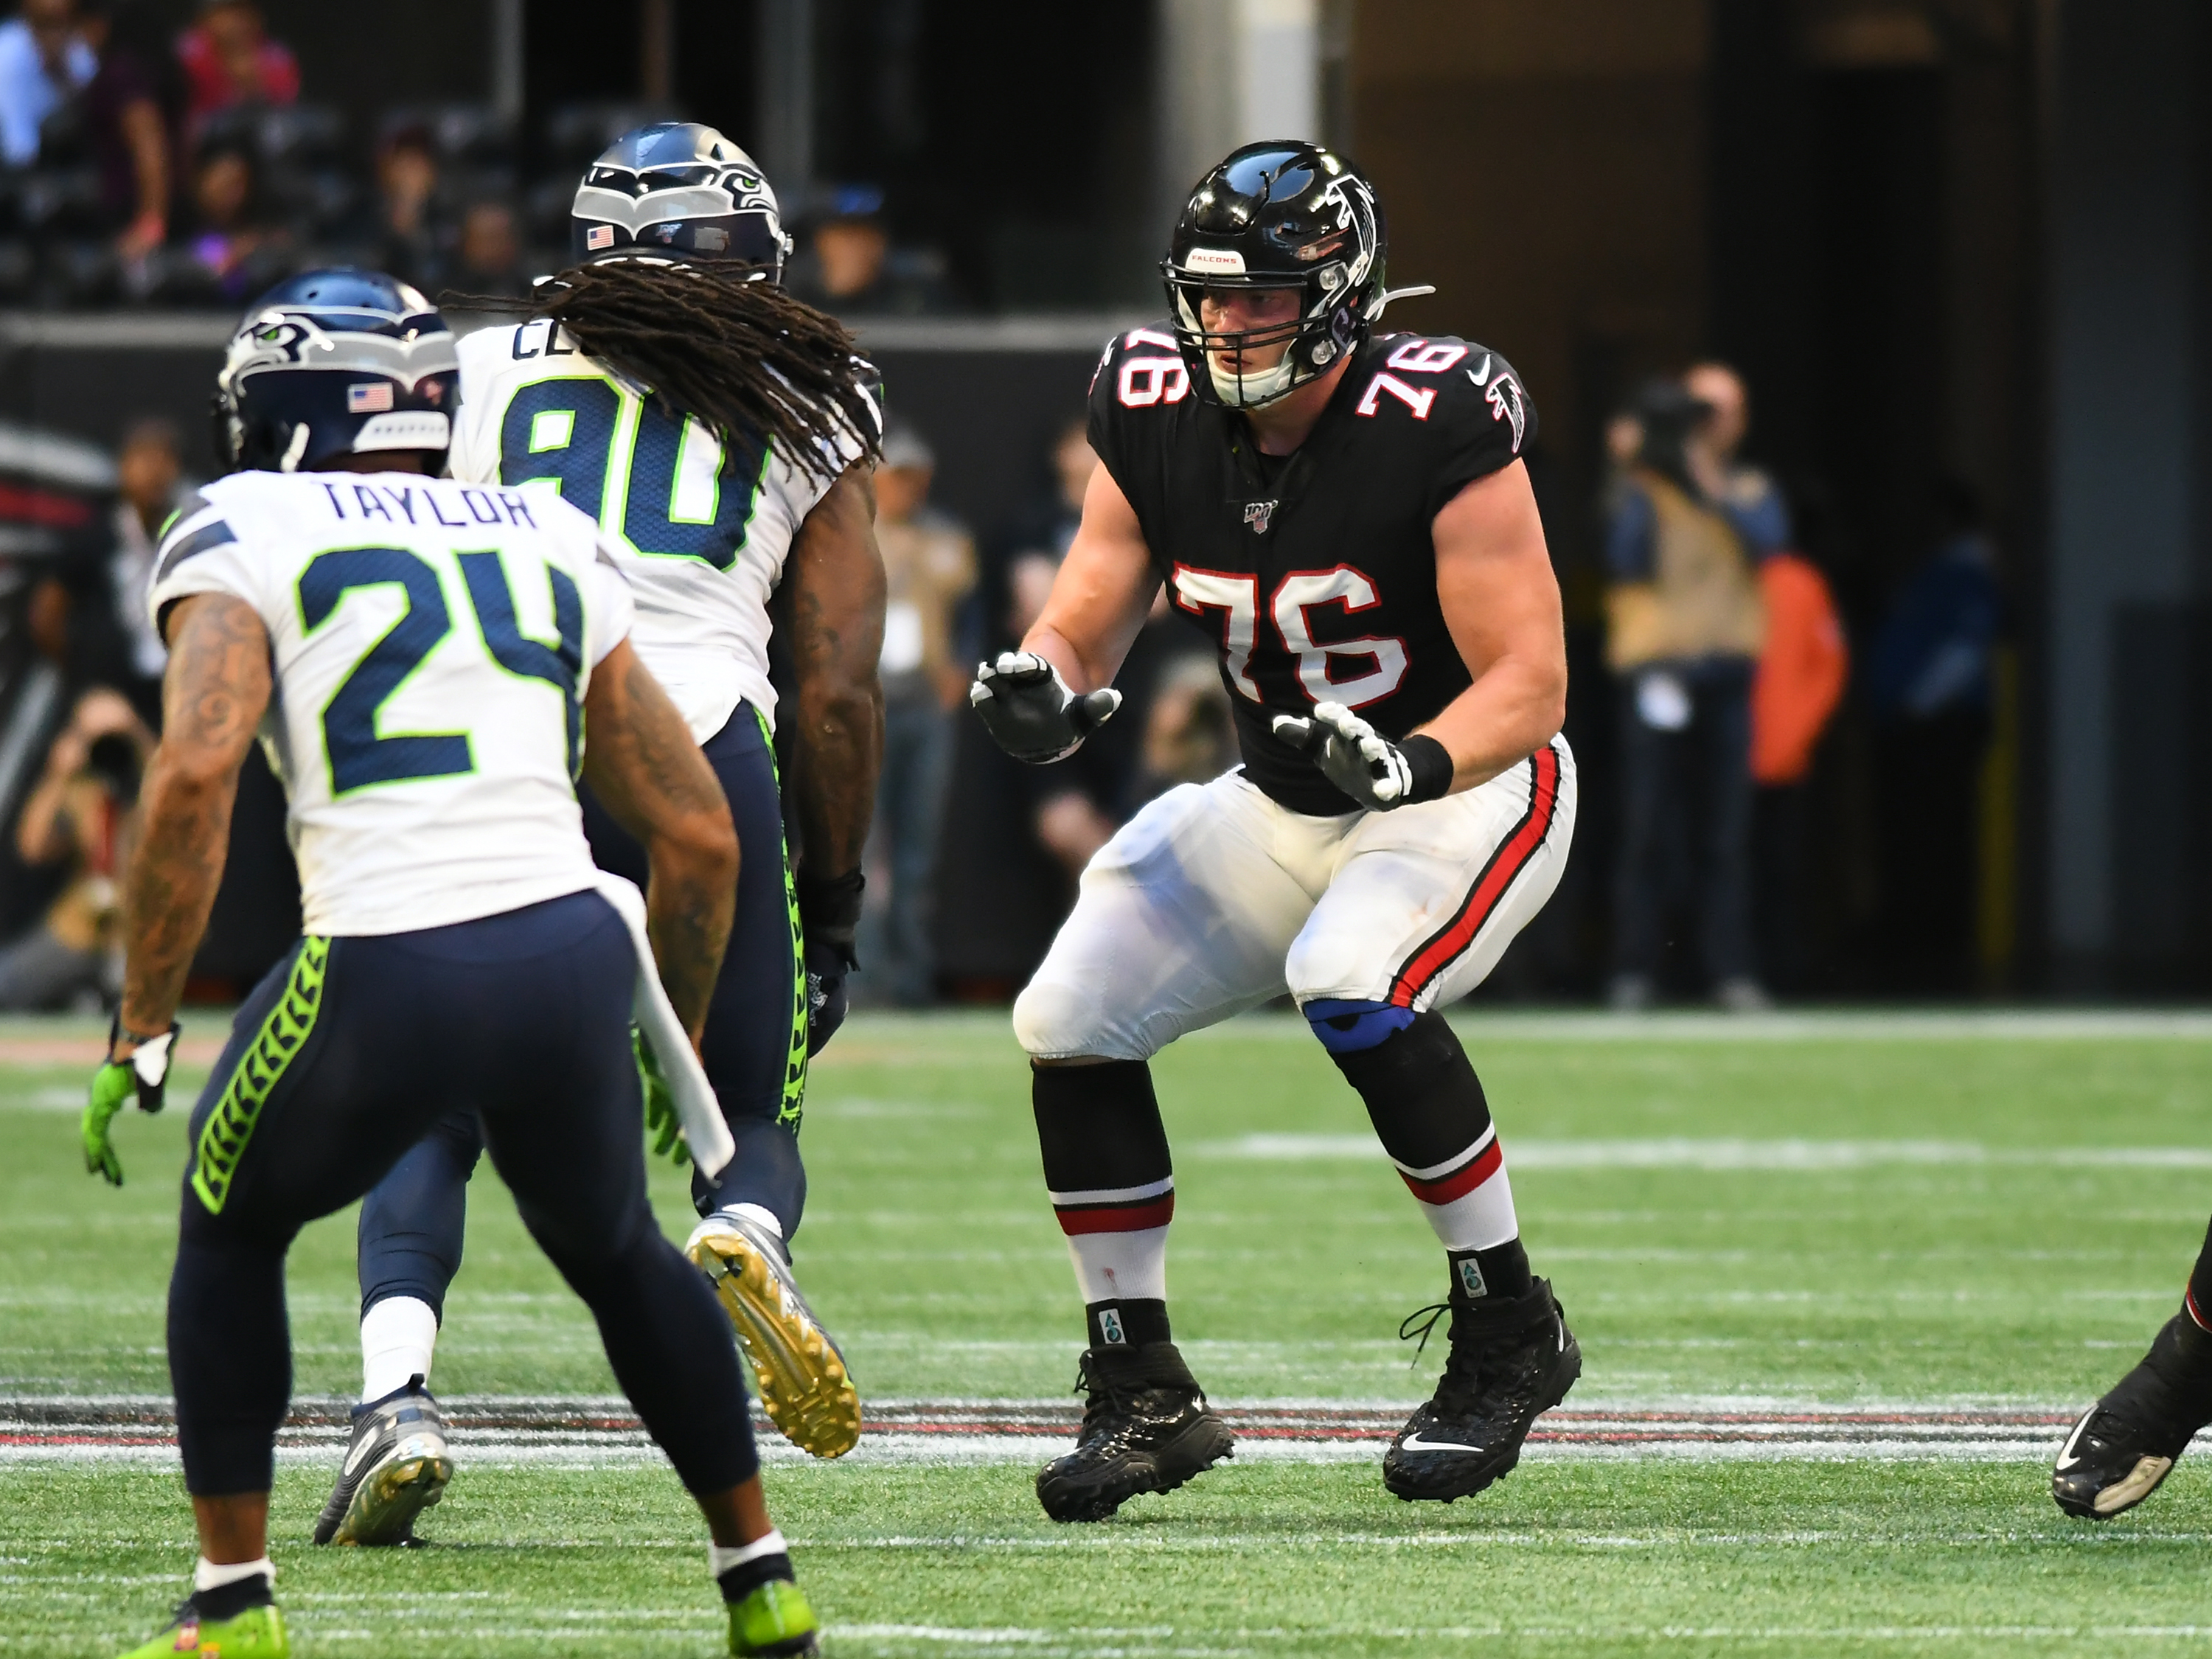 NFL: OCT 27 Seahawks at Falcons